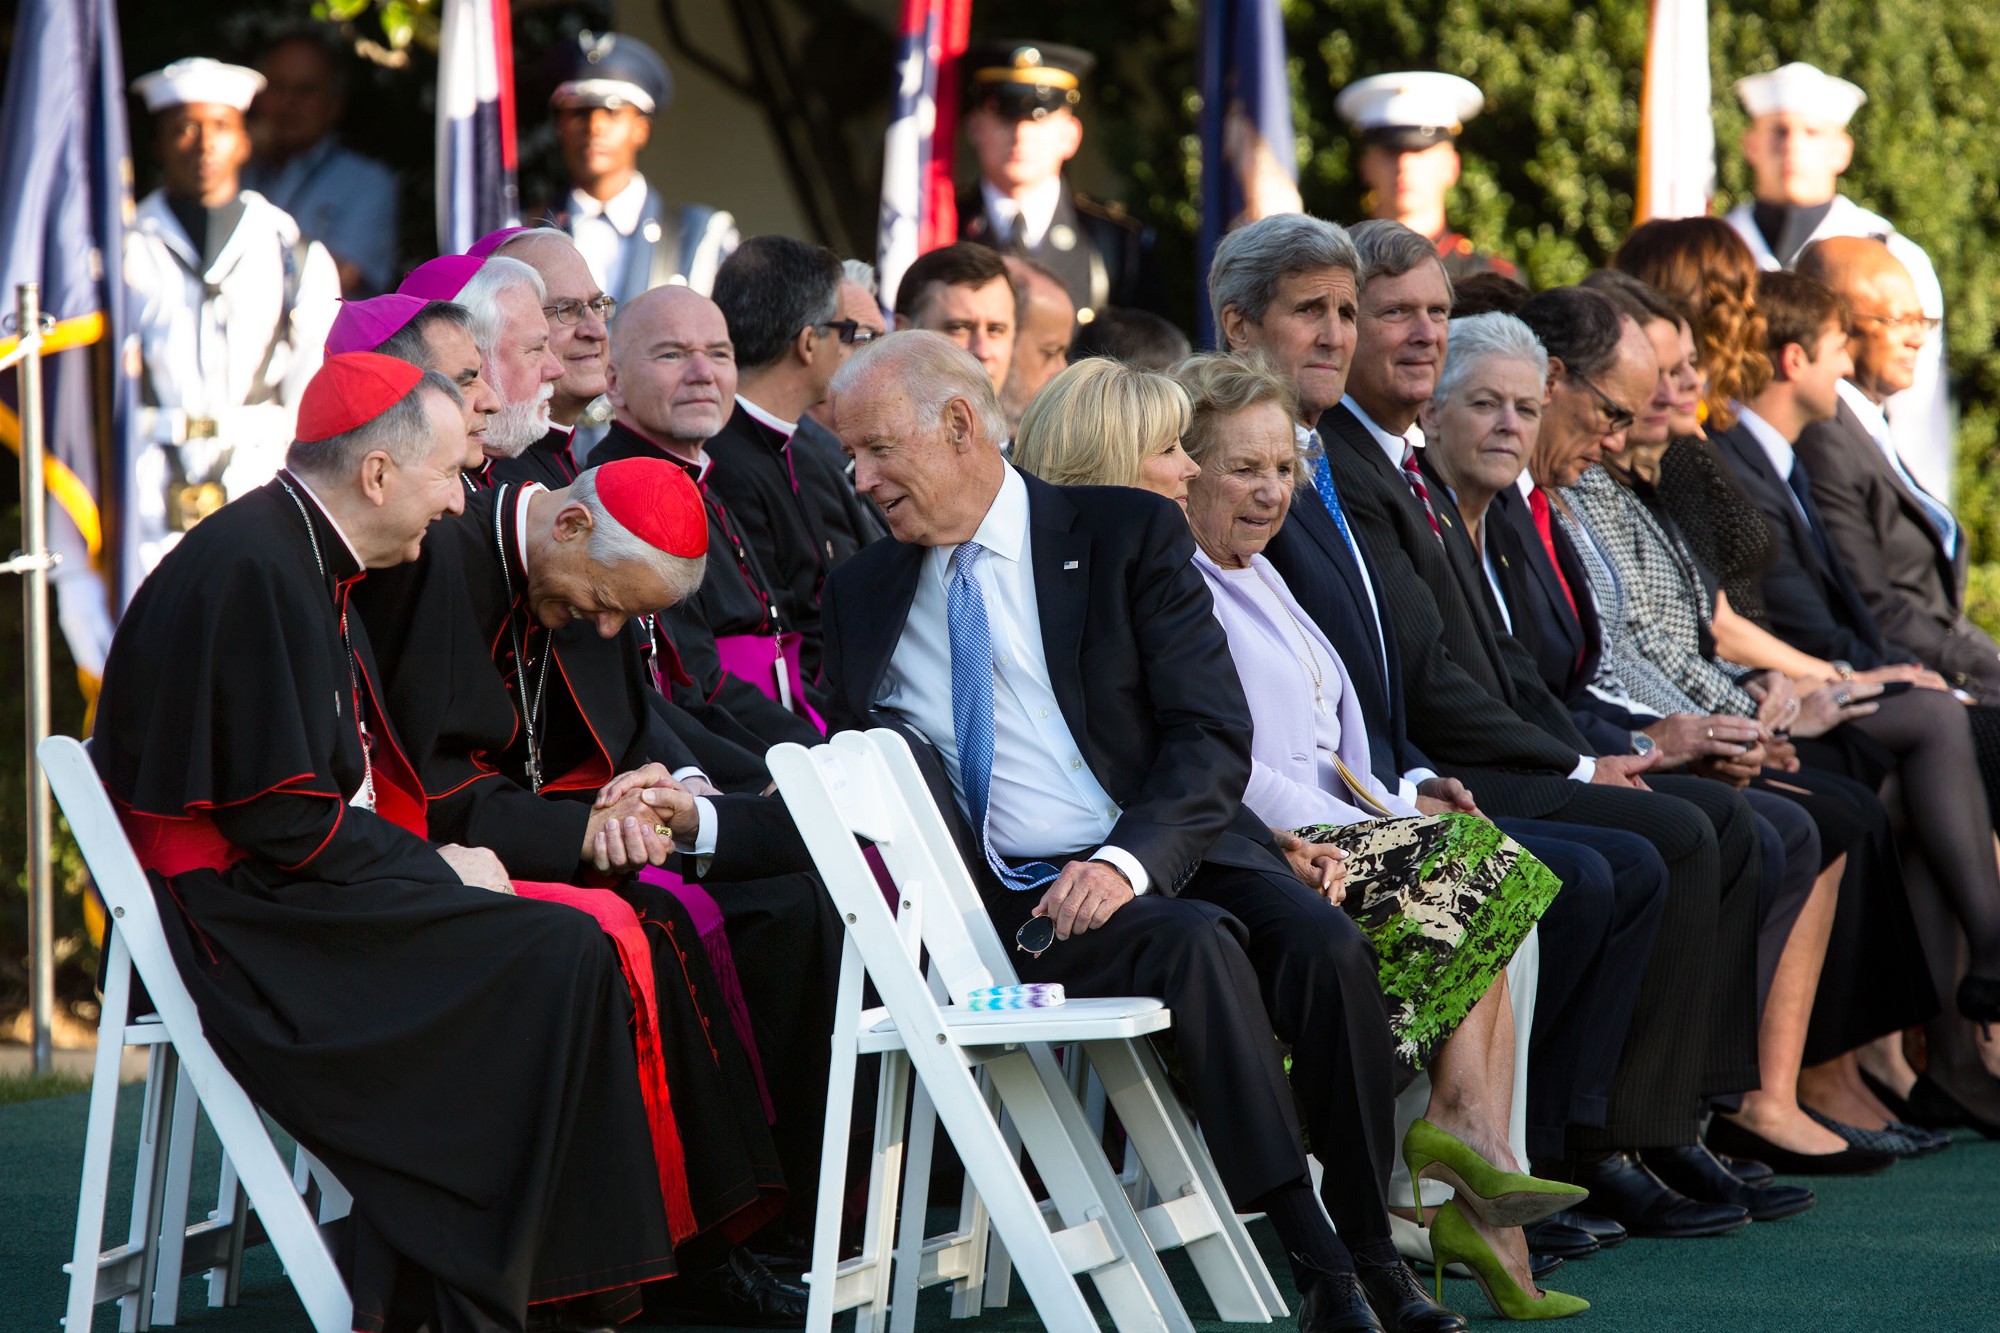 Vice President Biden talks with Cardinal Donald Wuerl and Cardinal Pietro Parolin before the ceremony. (Official White House Photo by Chuck Kennedy)